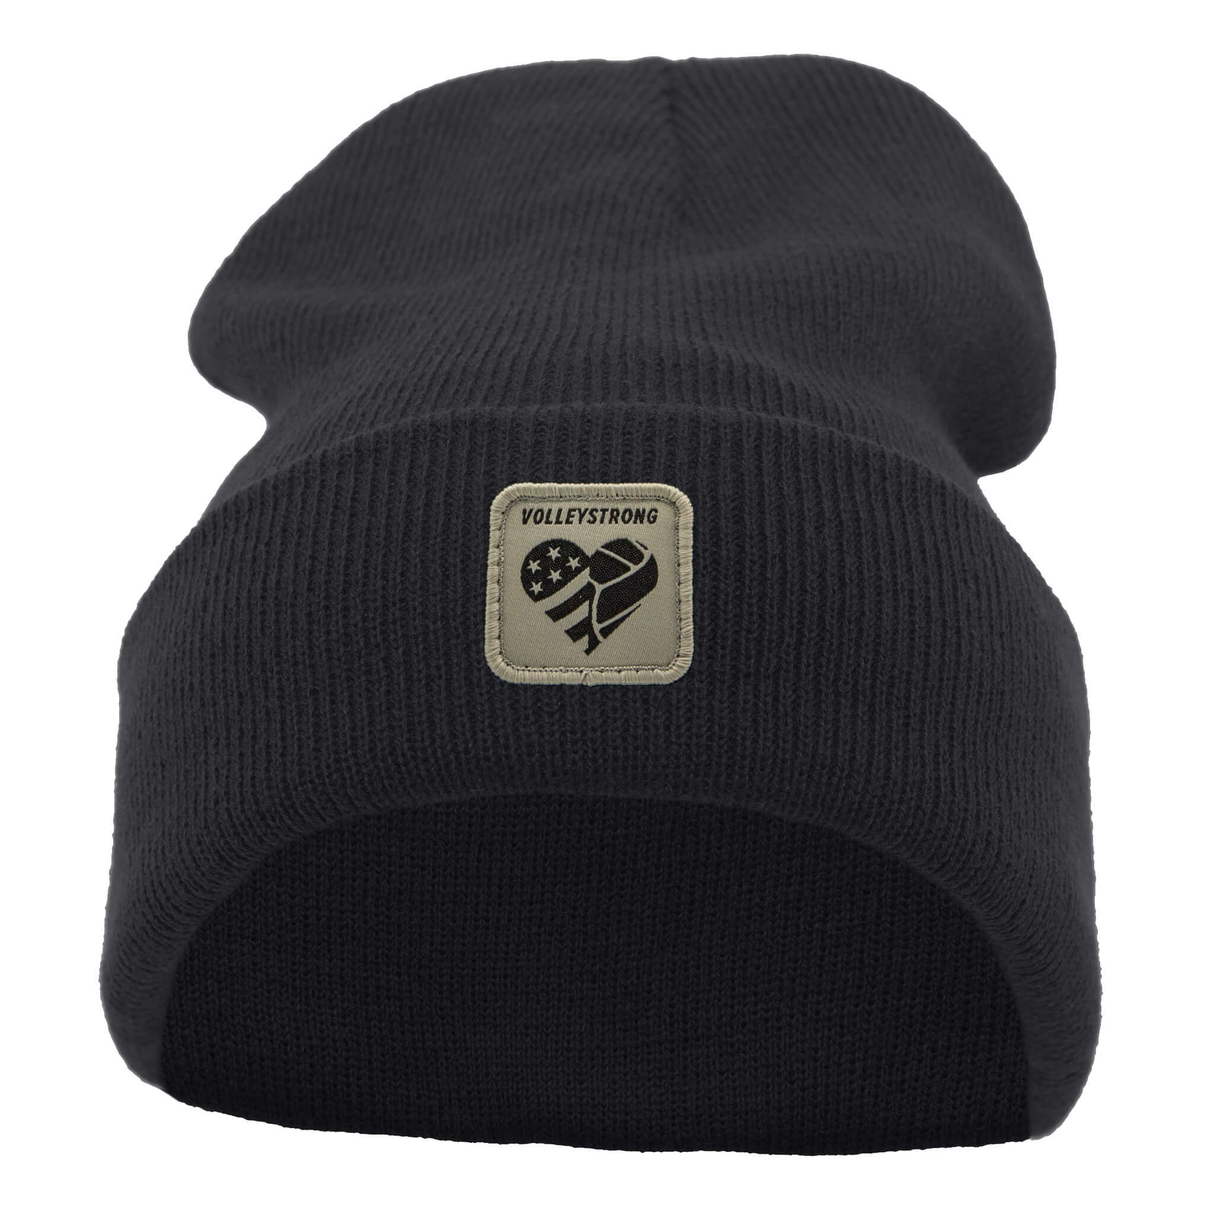 Volleystrong Classic Knit Beanie Black